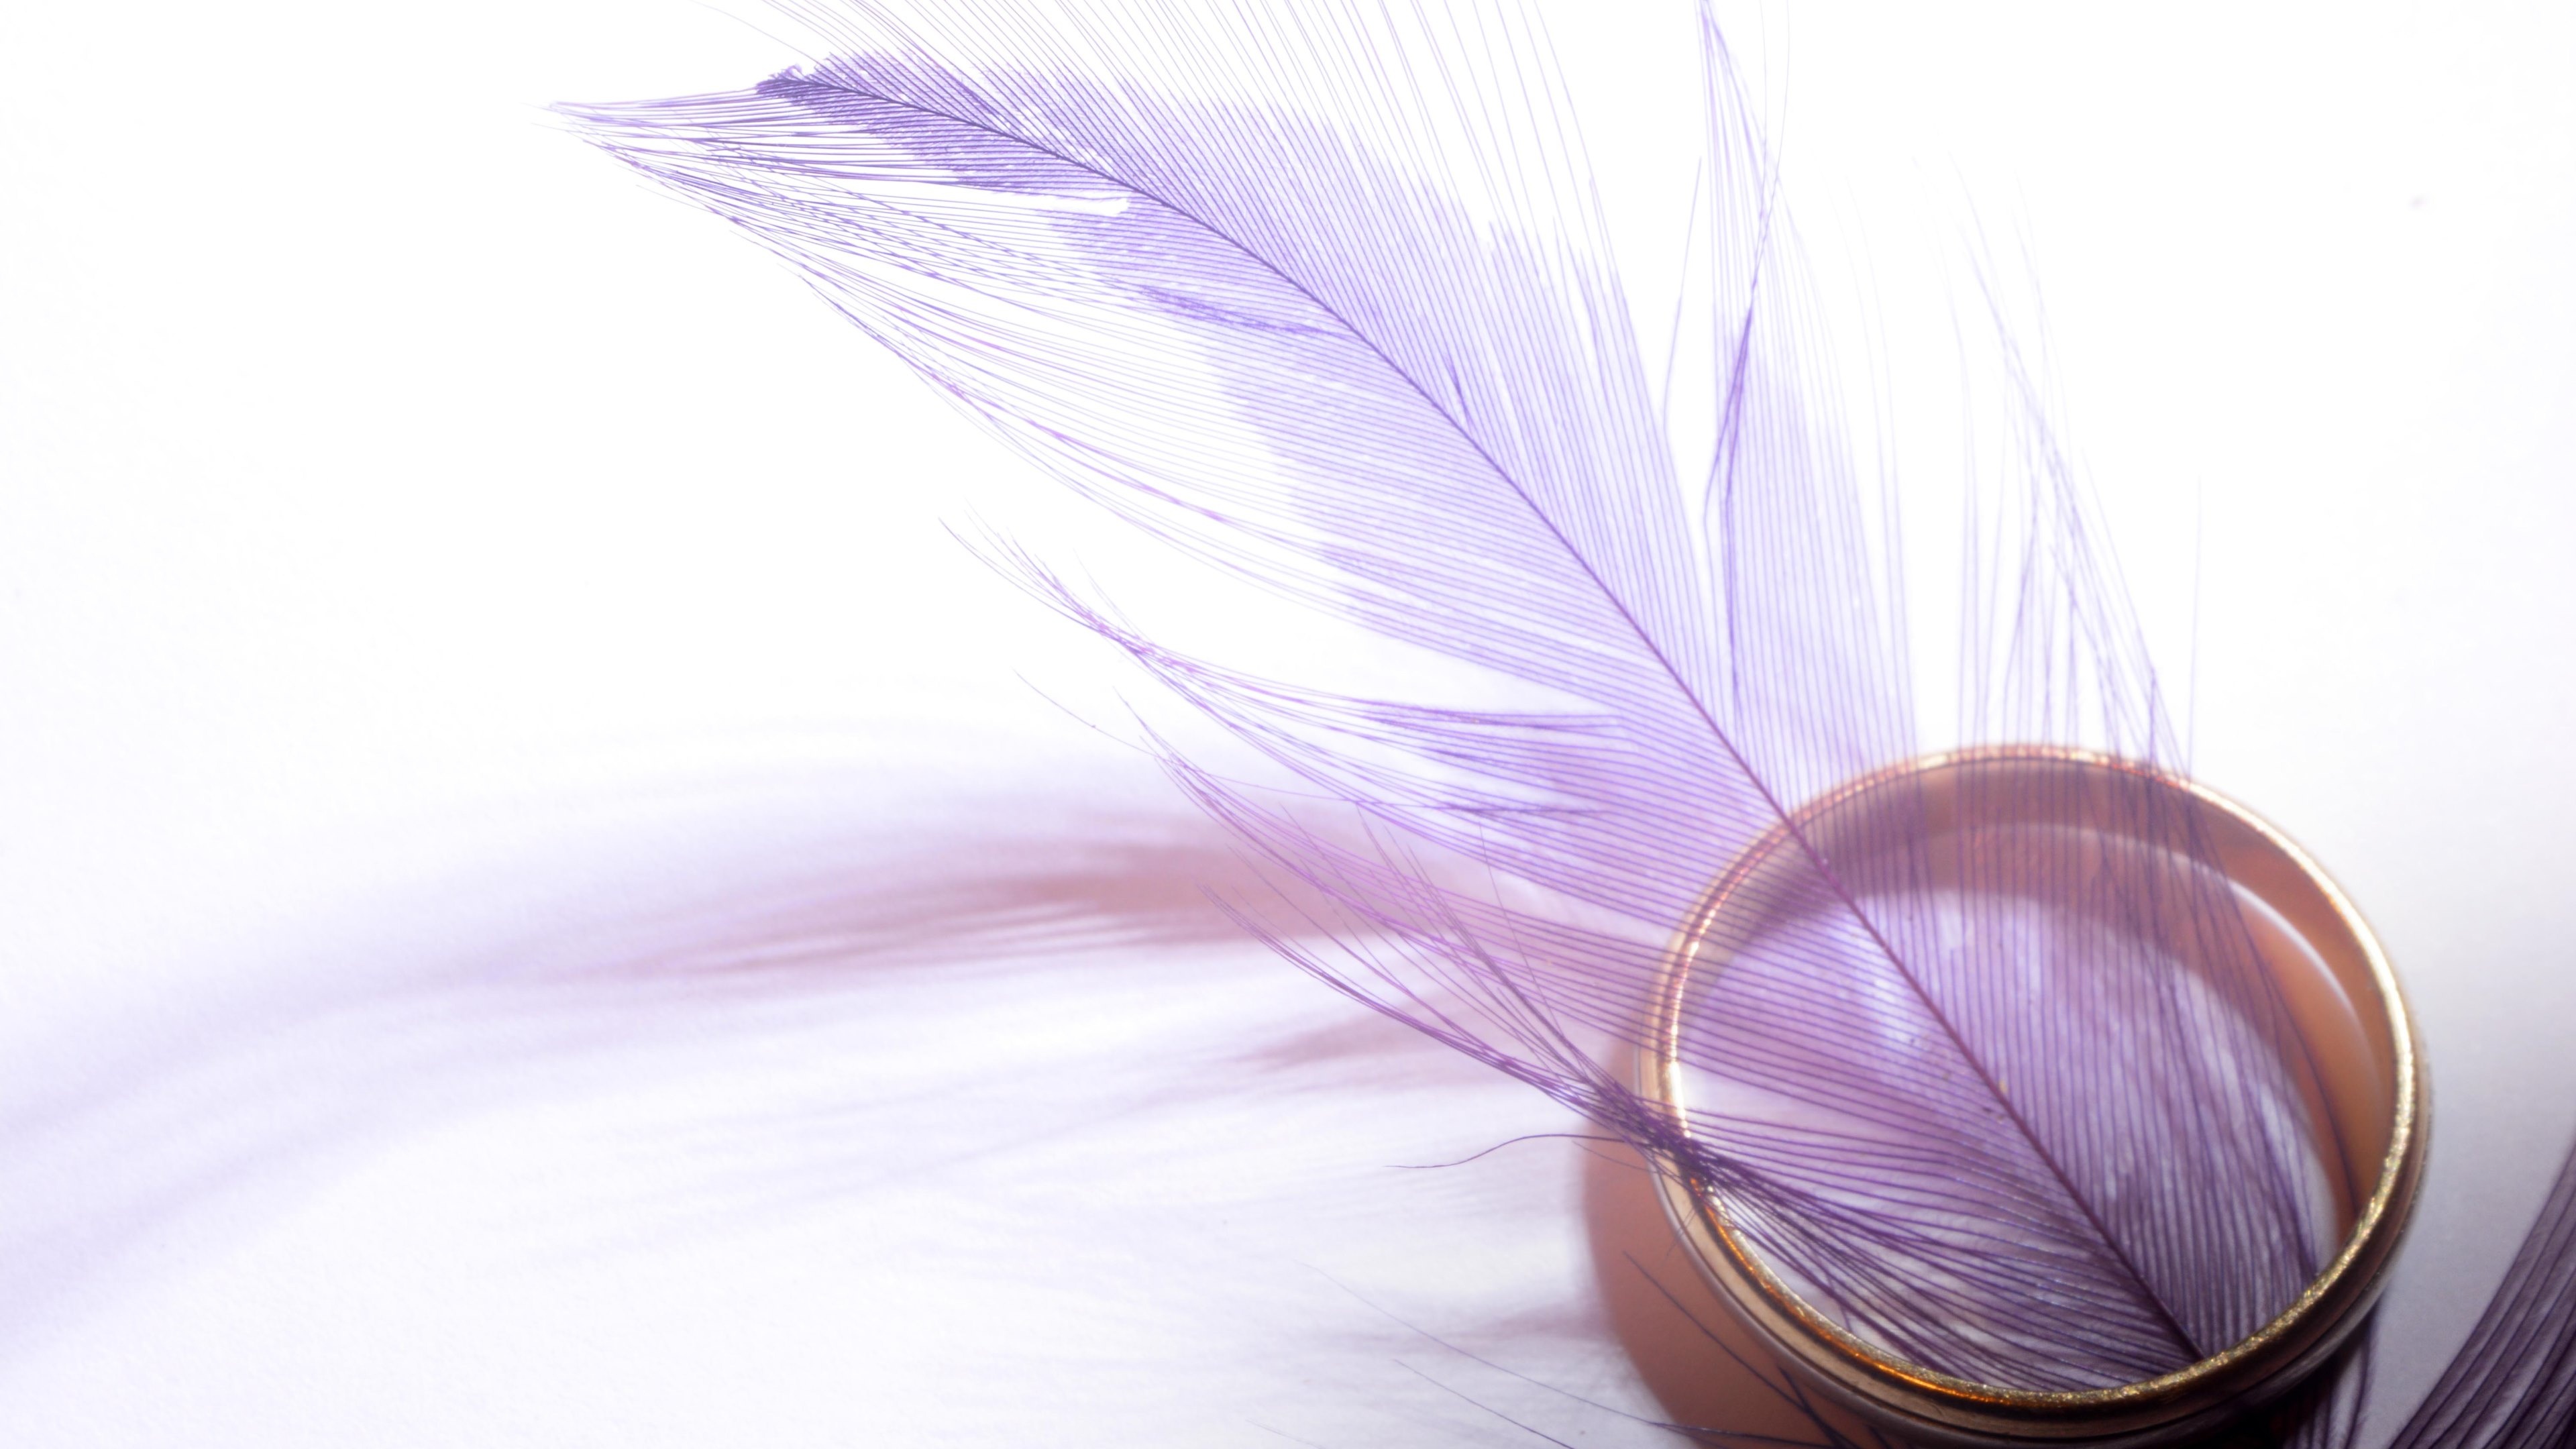 Feather: Fringed plumes that cover the bodies of birds. 3840x2160 4K Wallpaper.